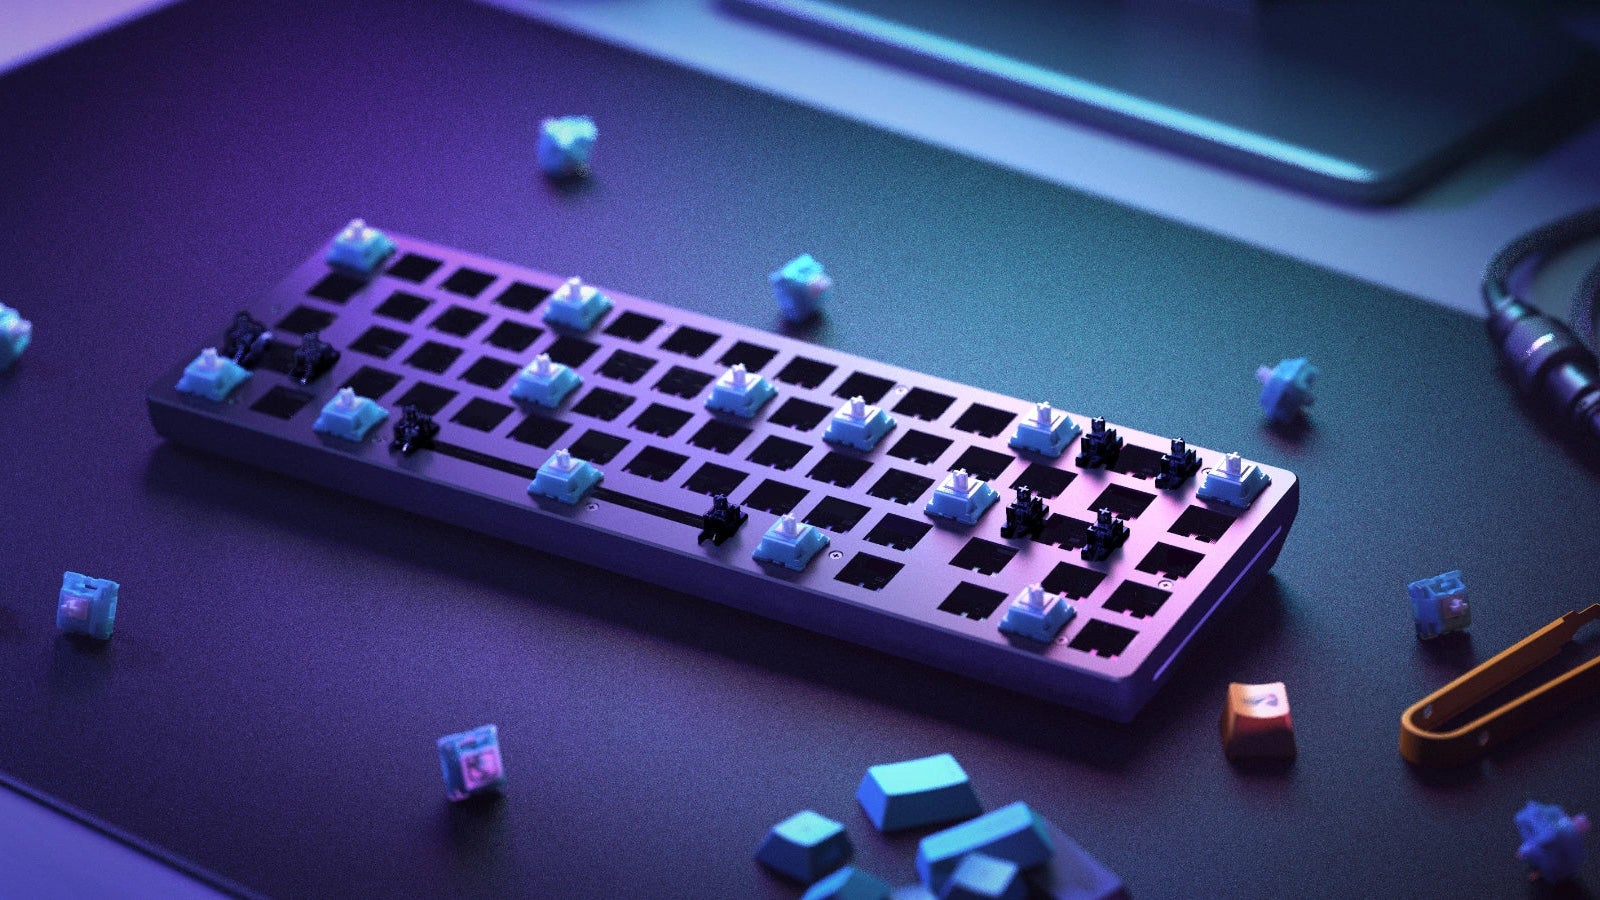 Here's how to make a custom keyboard for under £150/$150